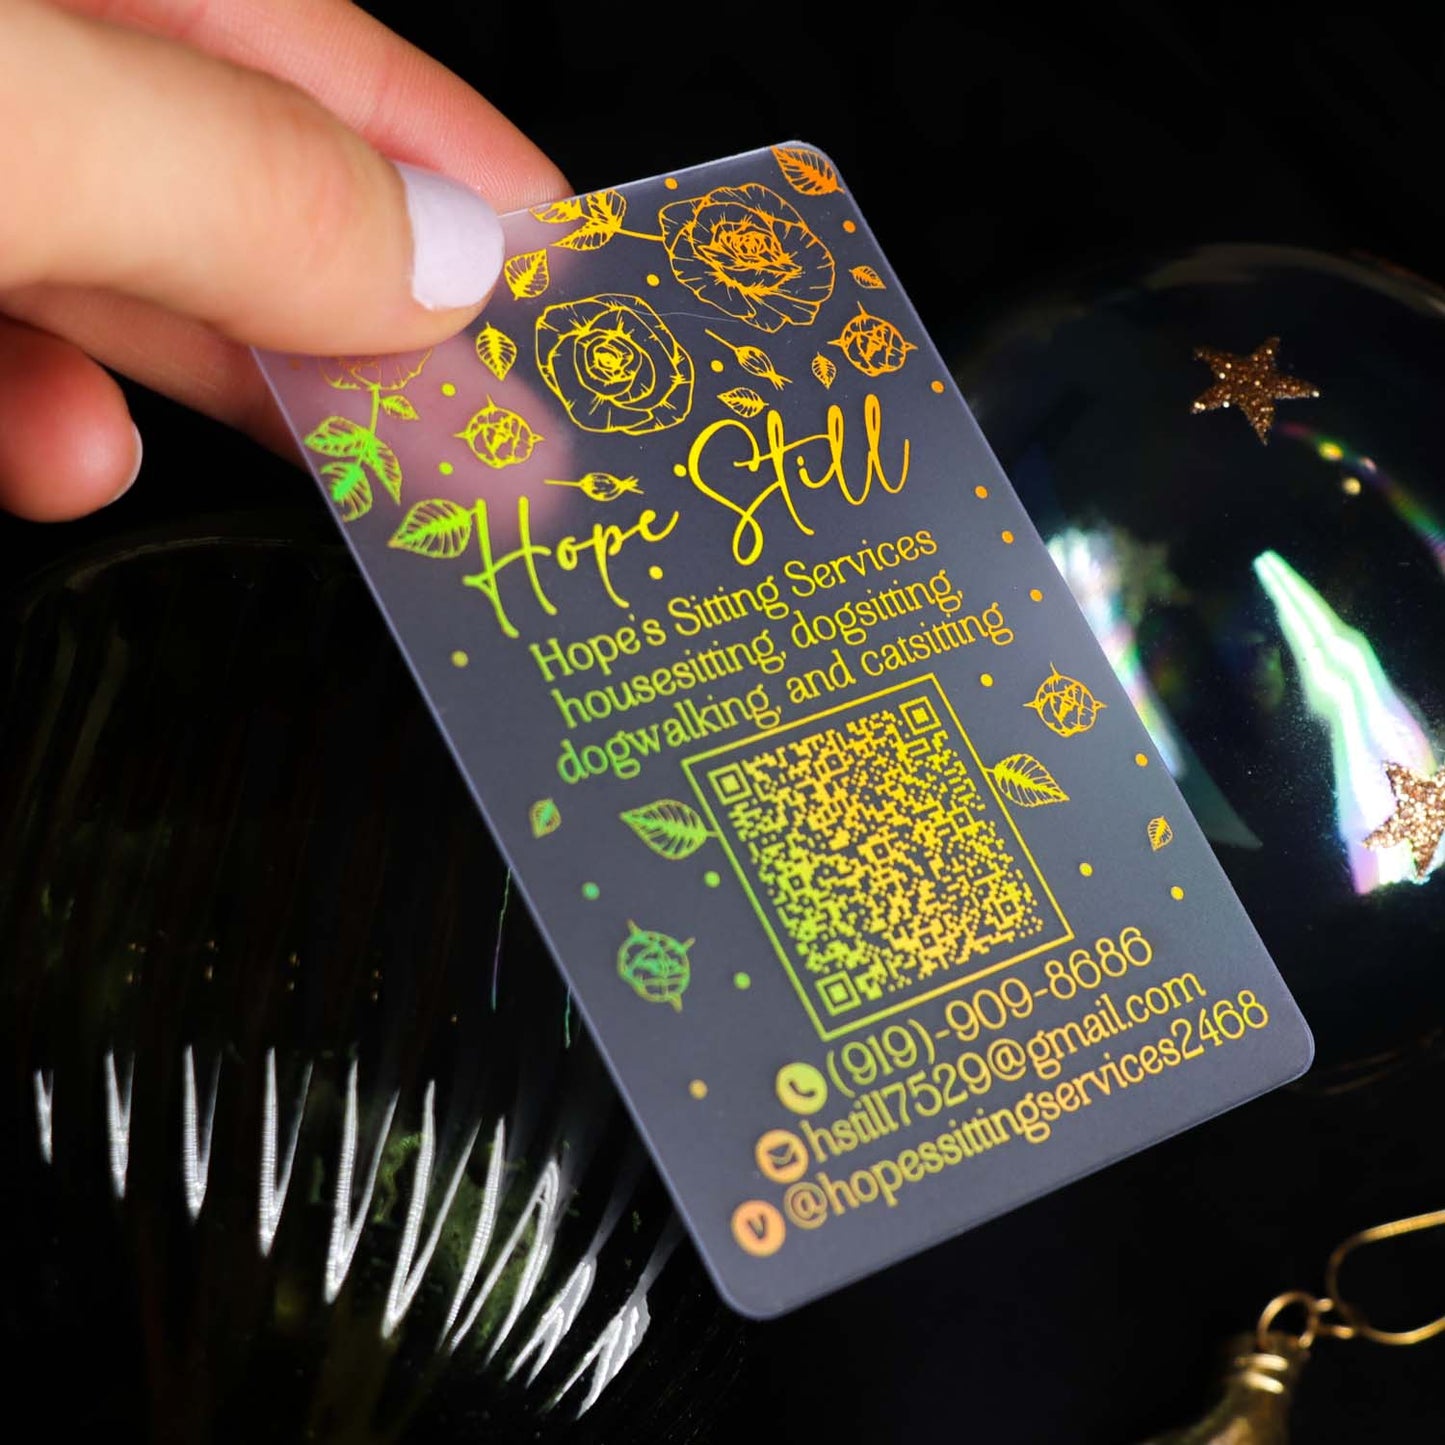 QR code Business Cards, Frosted Plastic Business Cards, hologram business cards, transparen business cards, qr code cards, holographic cards